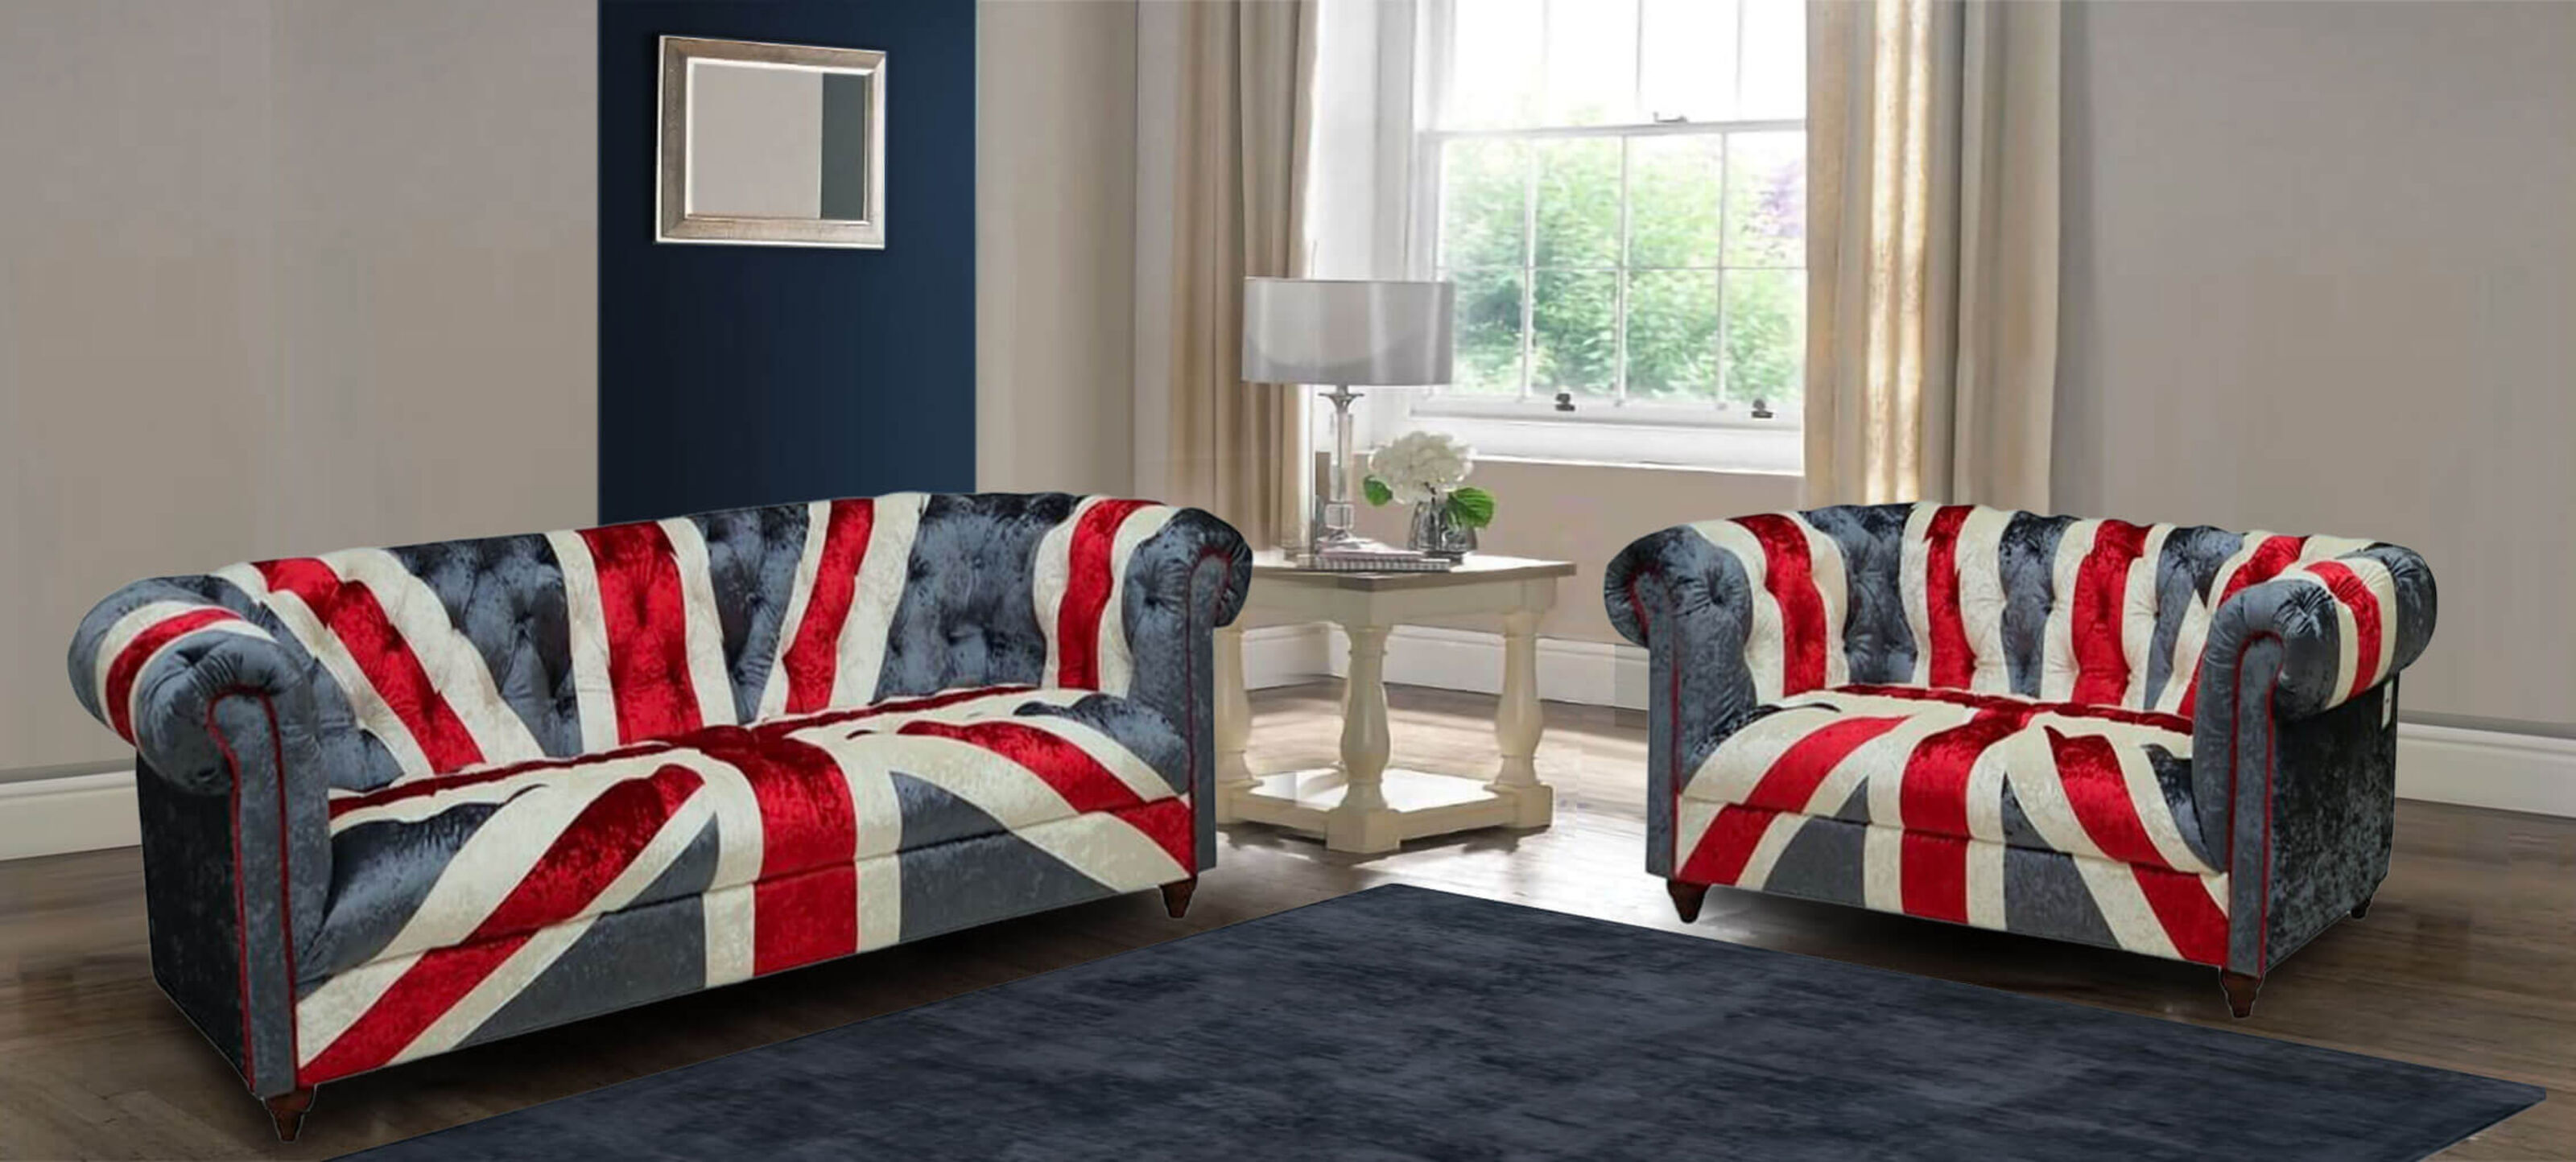 Patriotic Charm Chesterfield Sofas Featuring the Union Jack Design  %Post Title